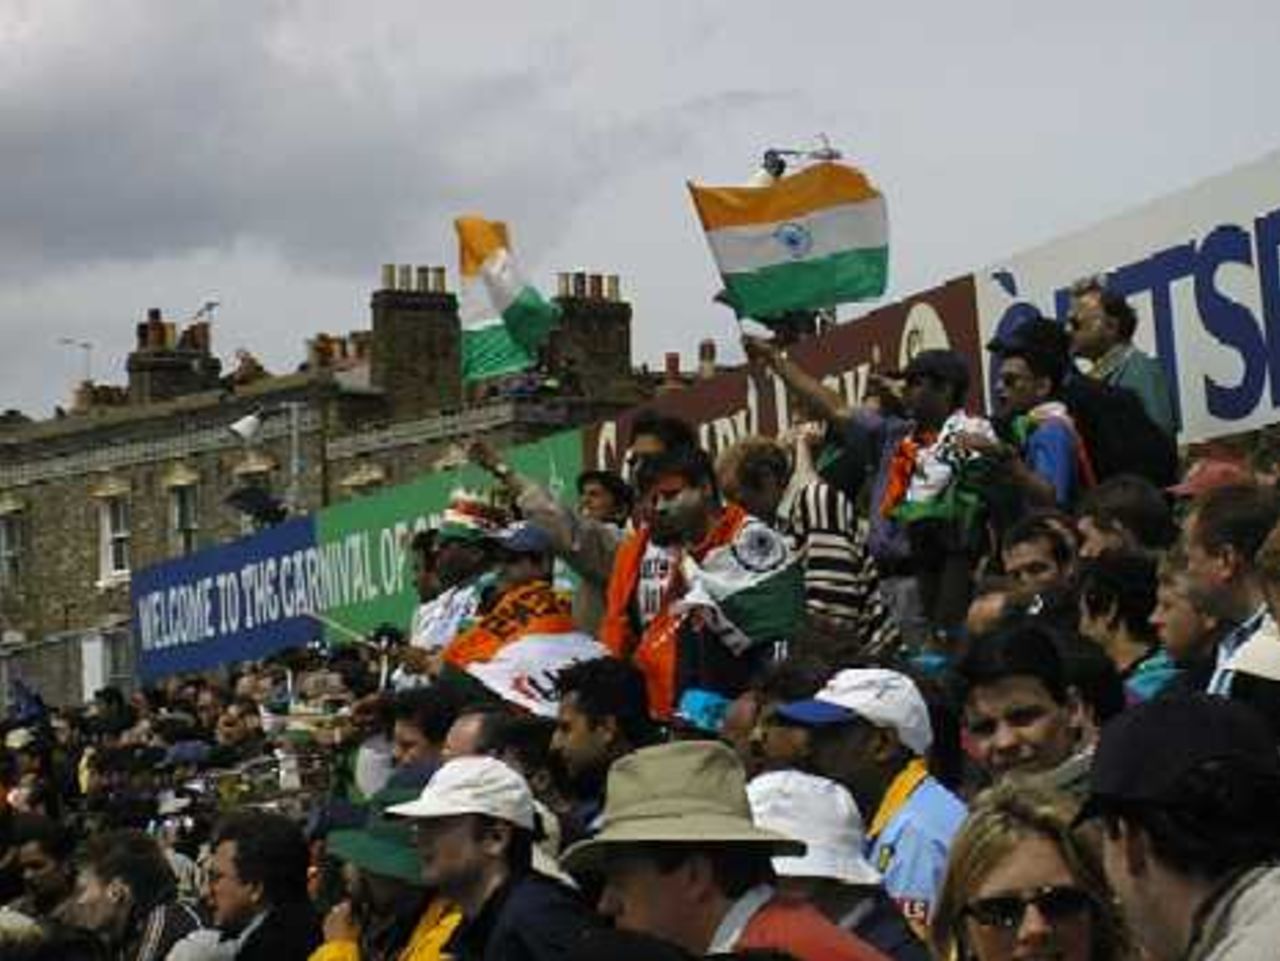 Indian fans wave flags at the Oval during the match against Australia on 4 June 1999, WC99